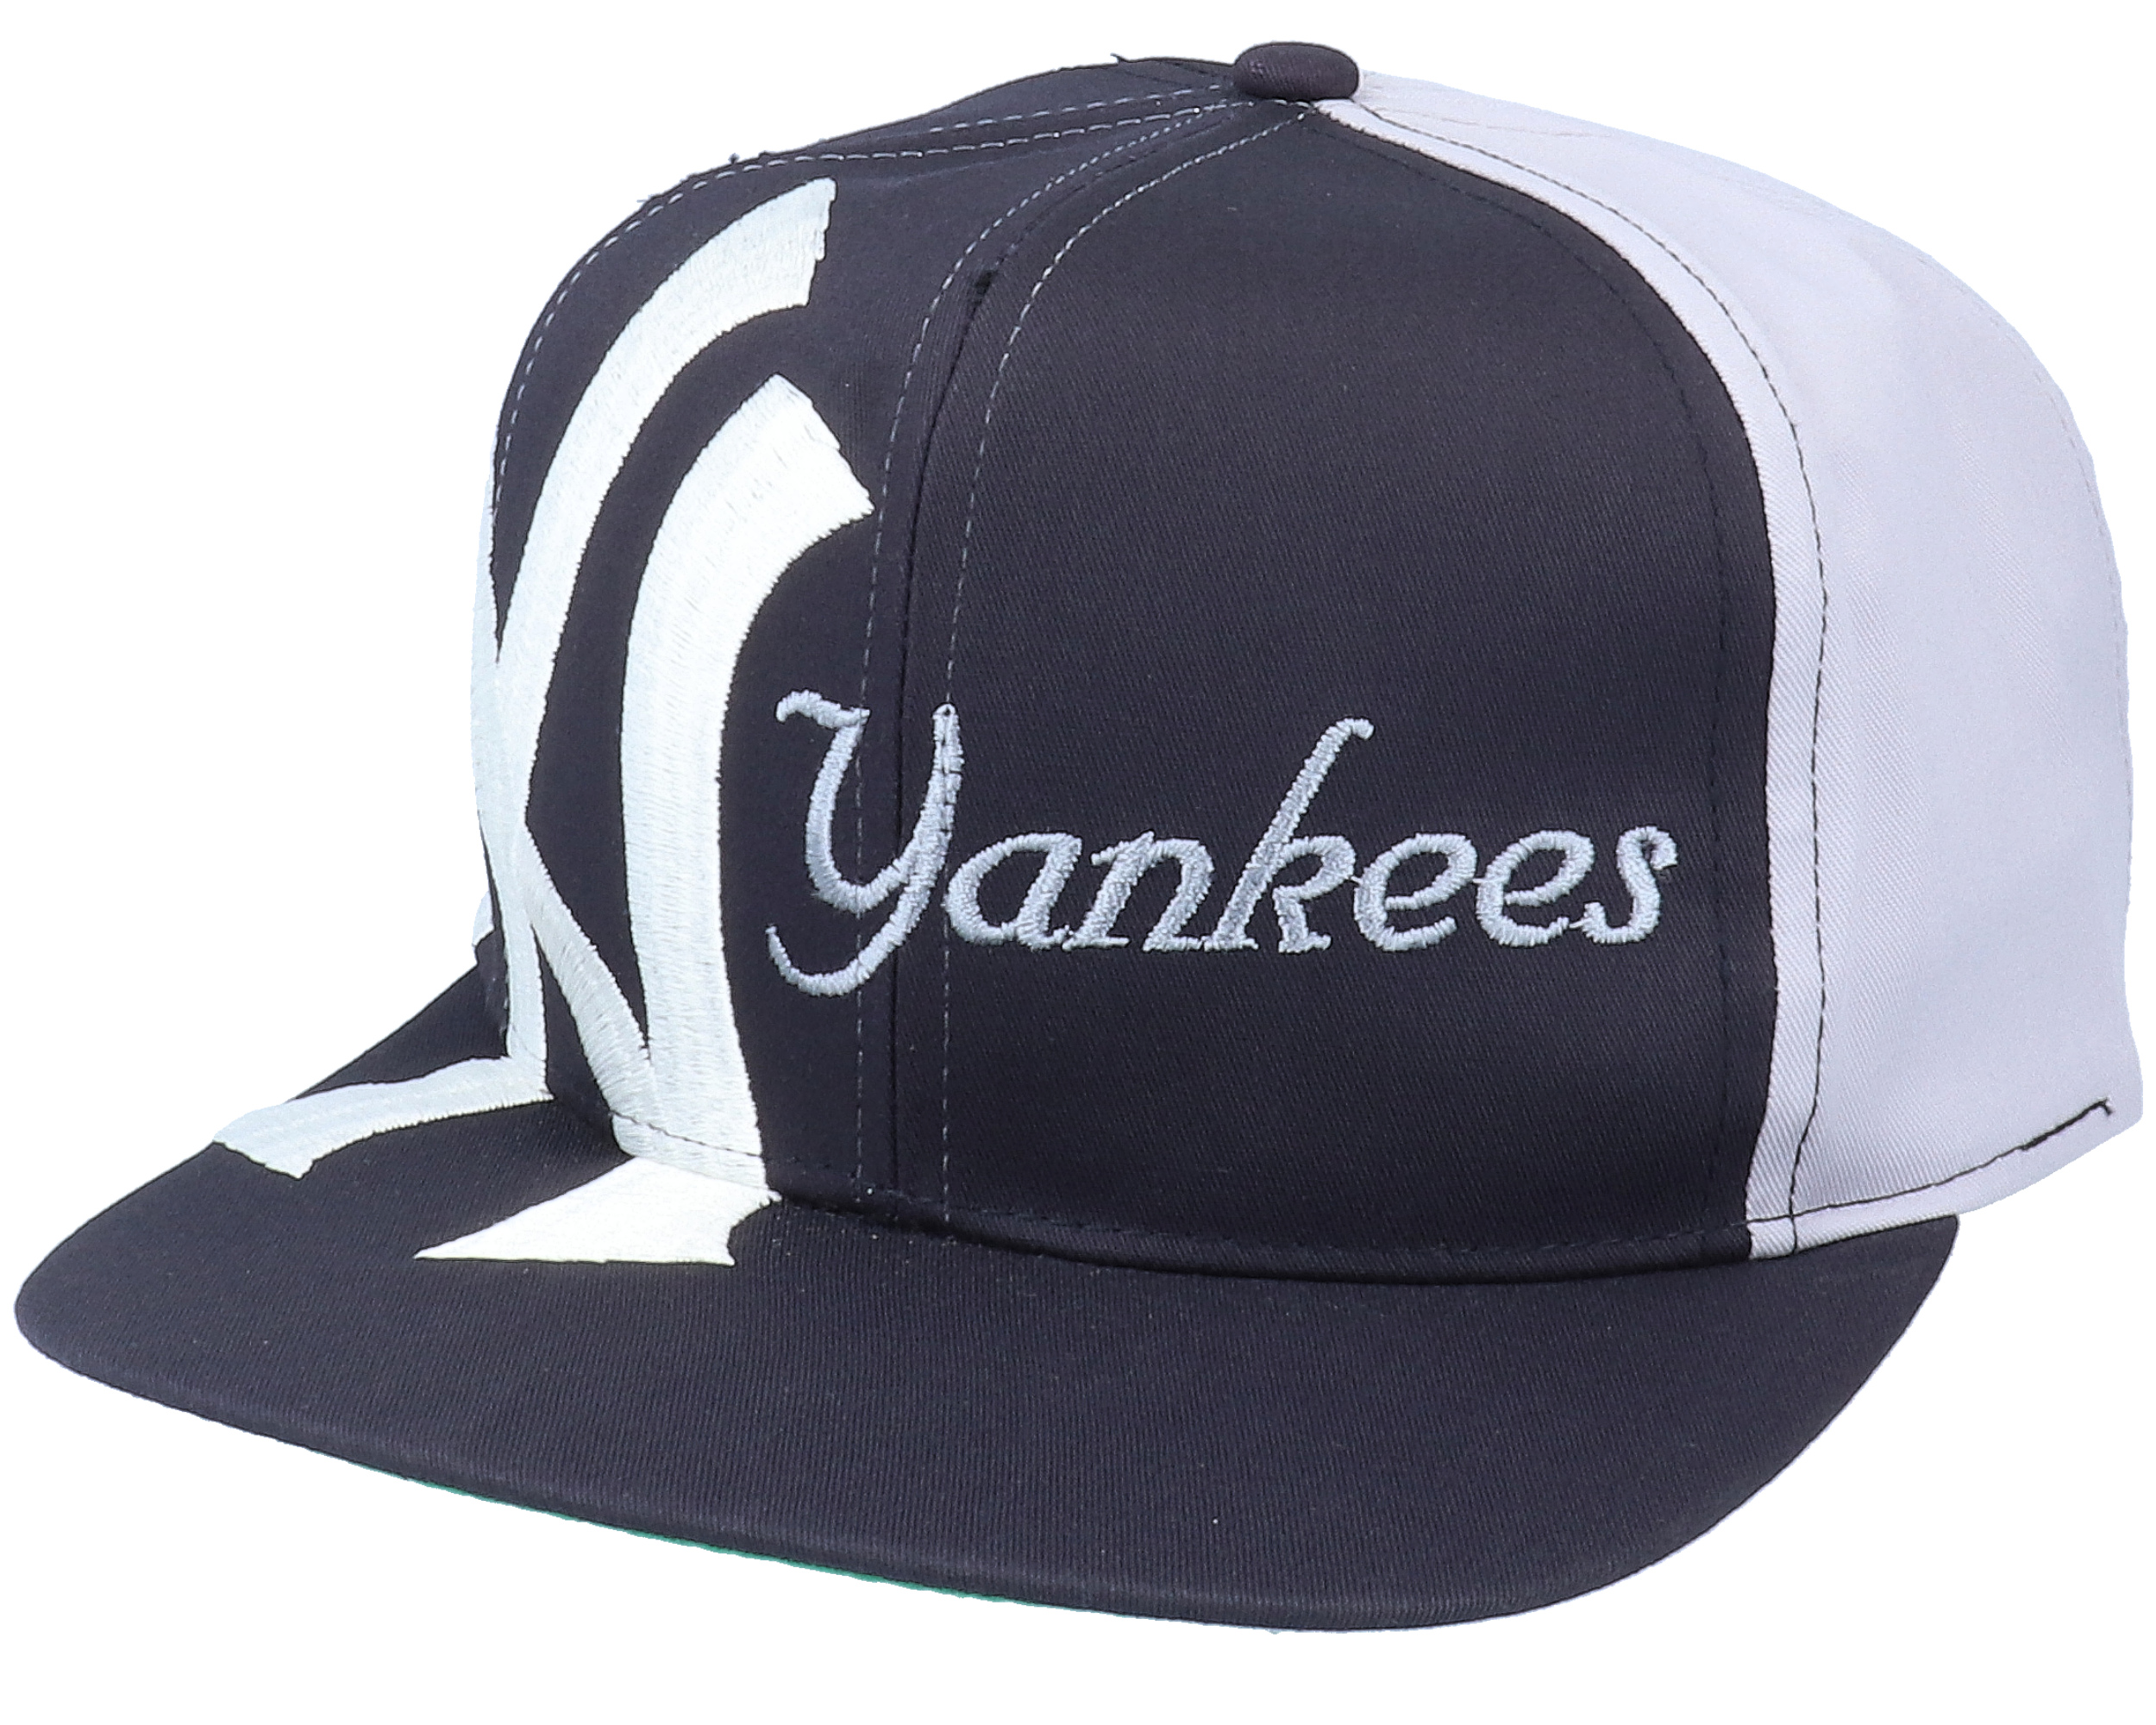 NWT Mitchell & Ness NY Yankees Fitted Hat Cap Black w/ Tiger